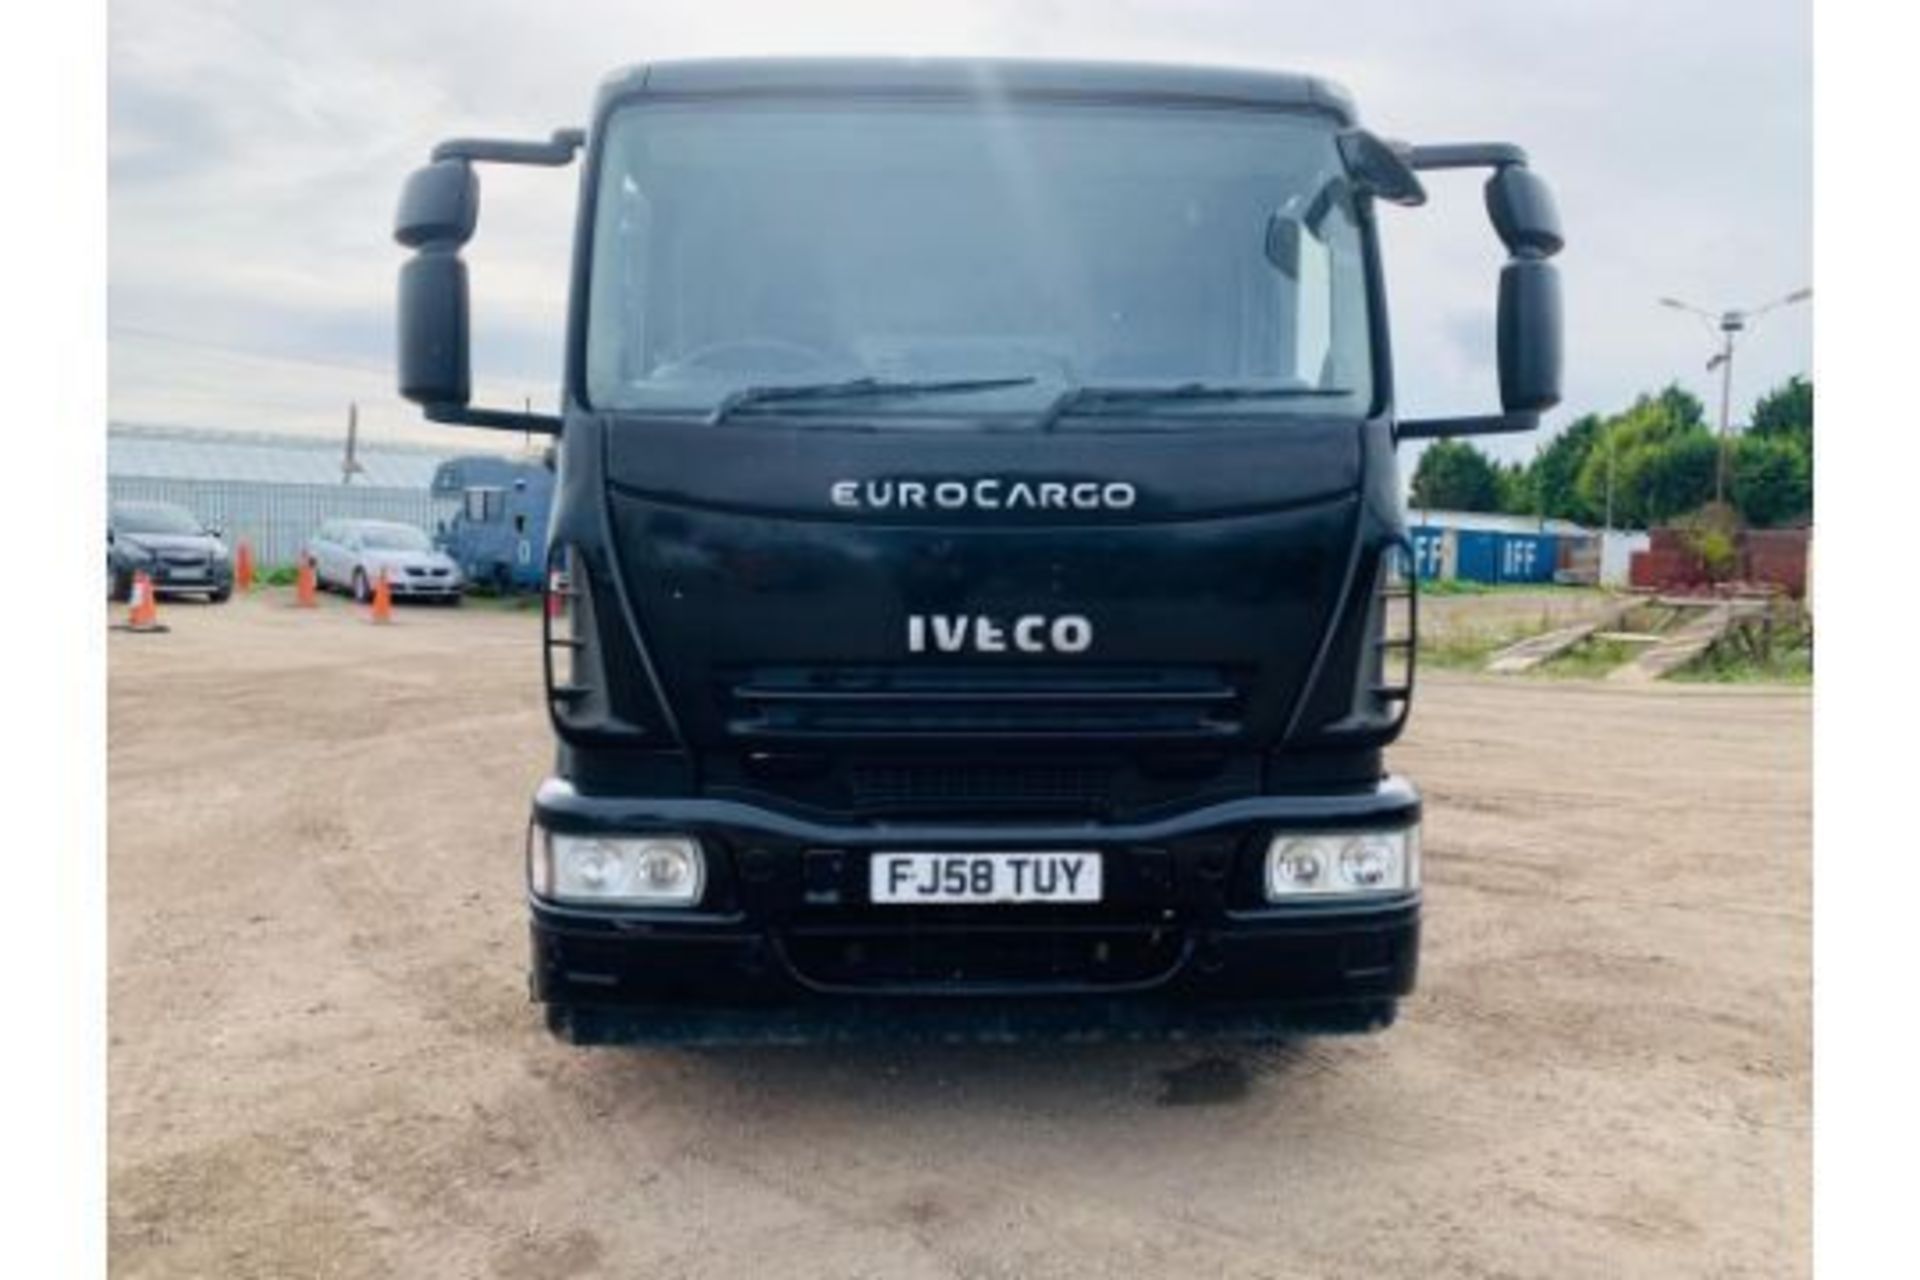 RESERVE MET Iveco Eurocargo 180E25 - 2009 Year - 18 Tonne - 4x2 - Day Cab Truck - Image 3 of 11